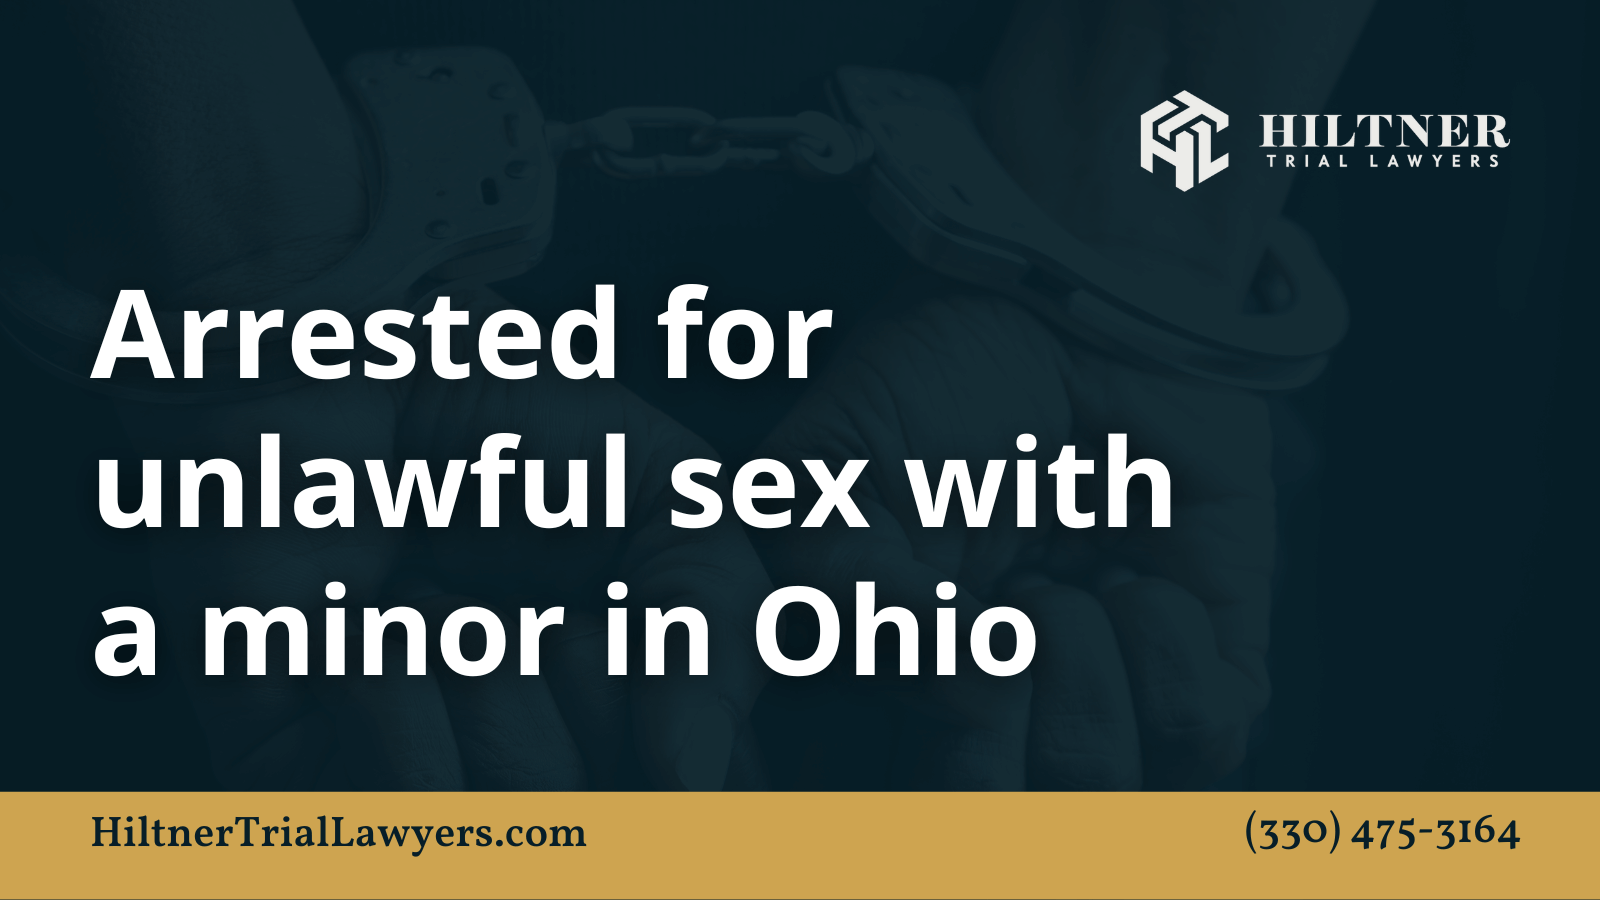 Arrested for unlawful sex with a minor in Ohio - Hiltner Trial Lawyers Ohio - max hiltner